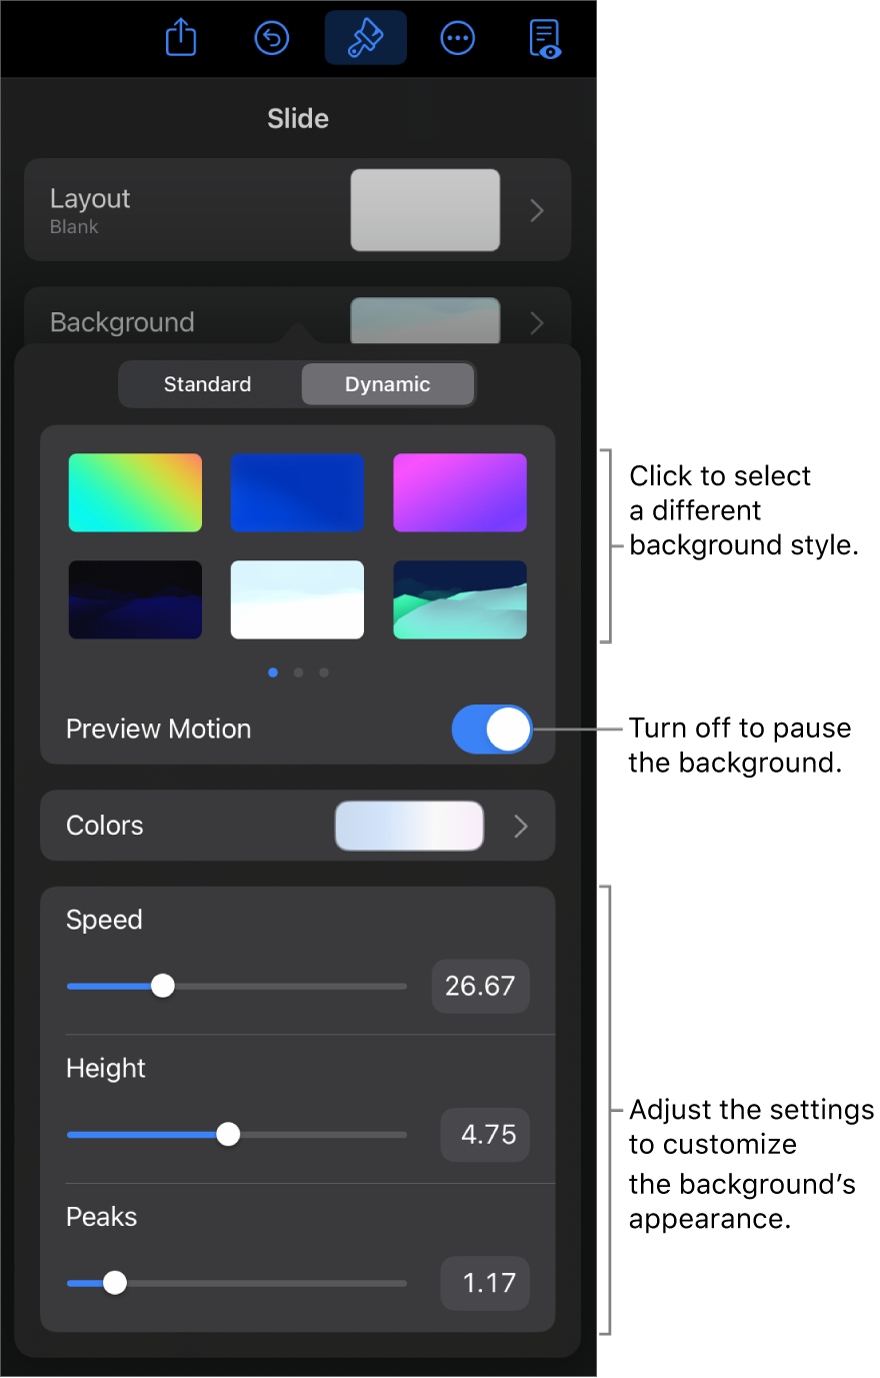 The dynamic background controls with the background style thumbnails, Preview Motion button, and customization controls displayed.